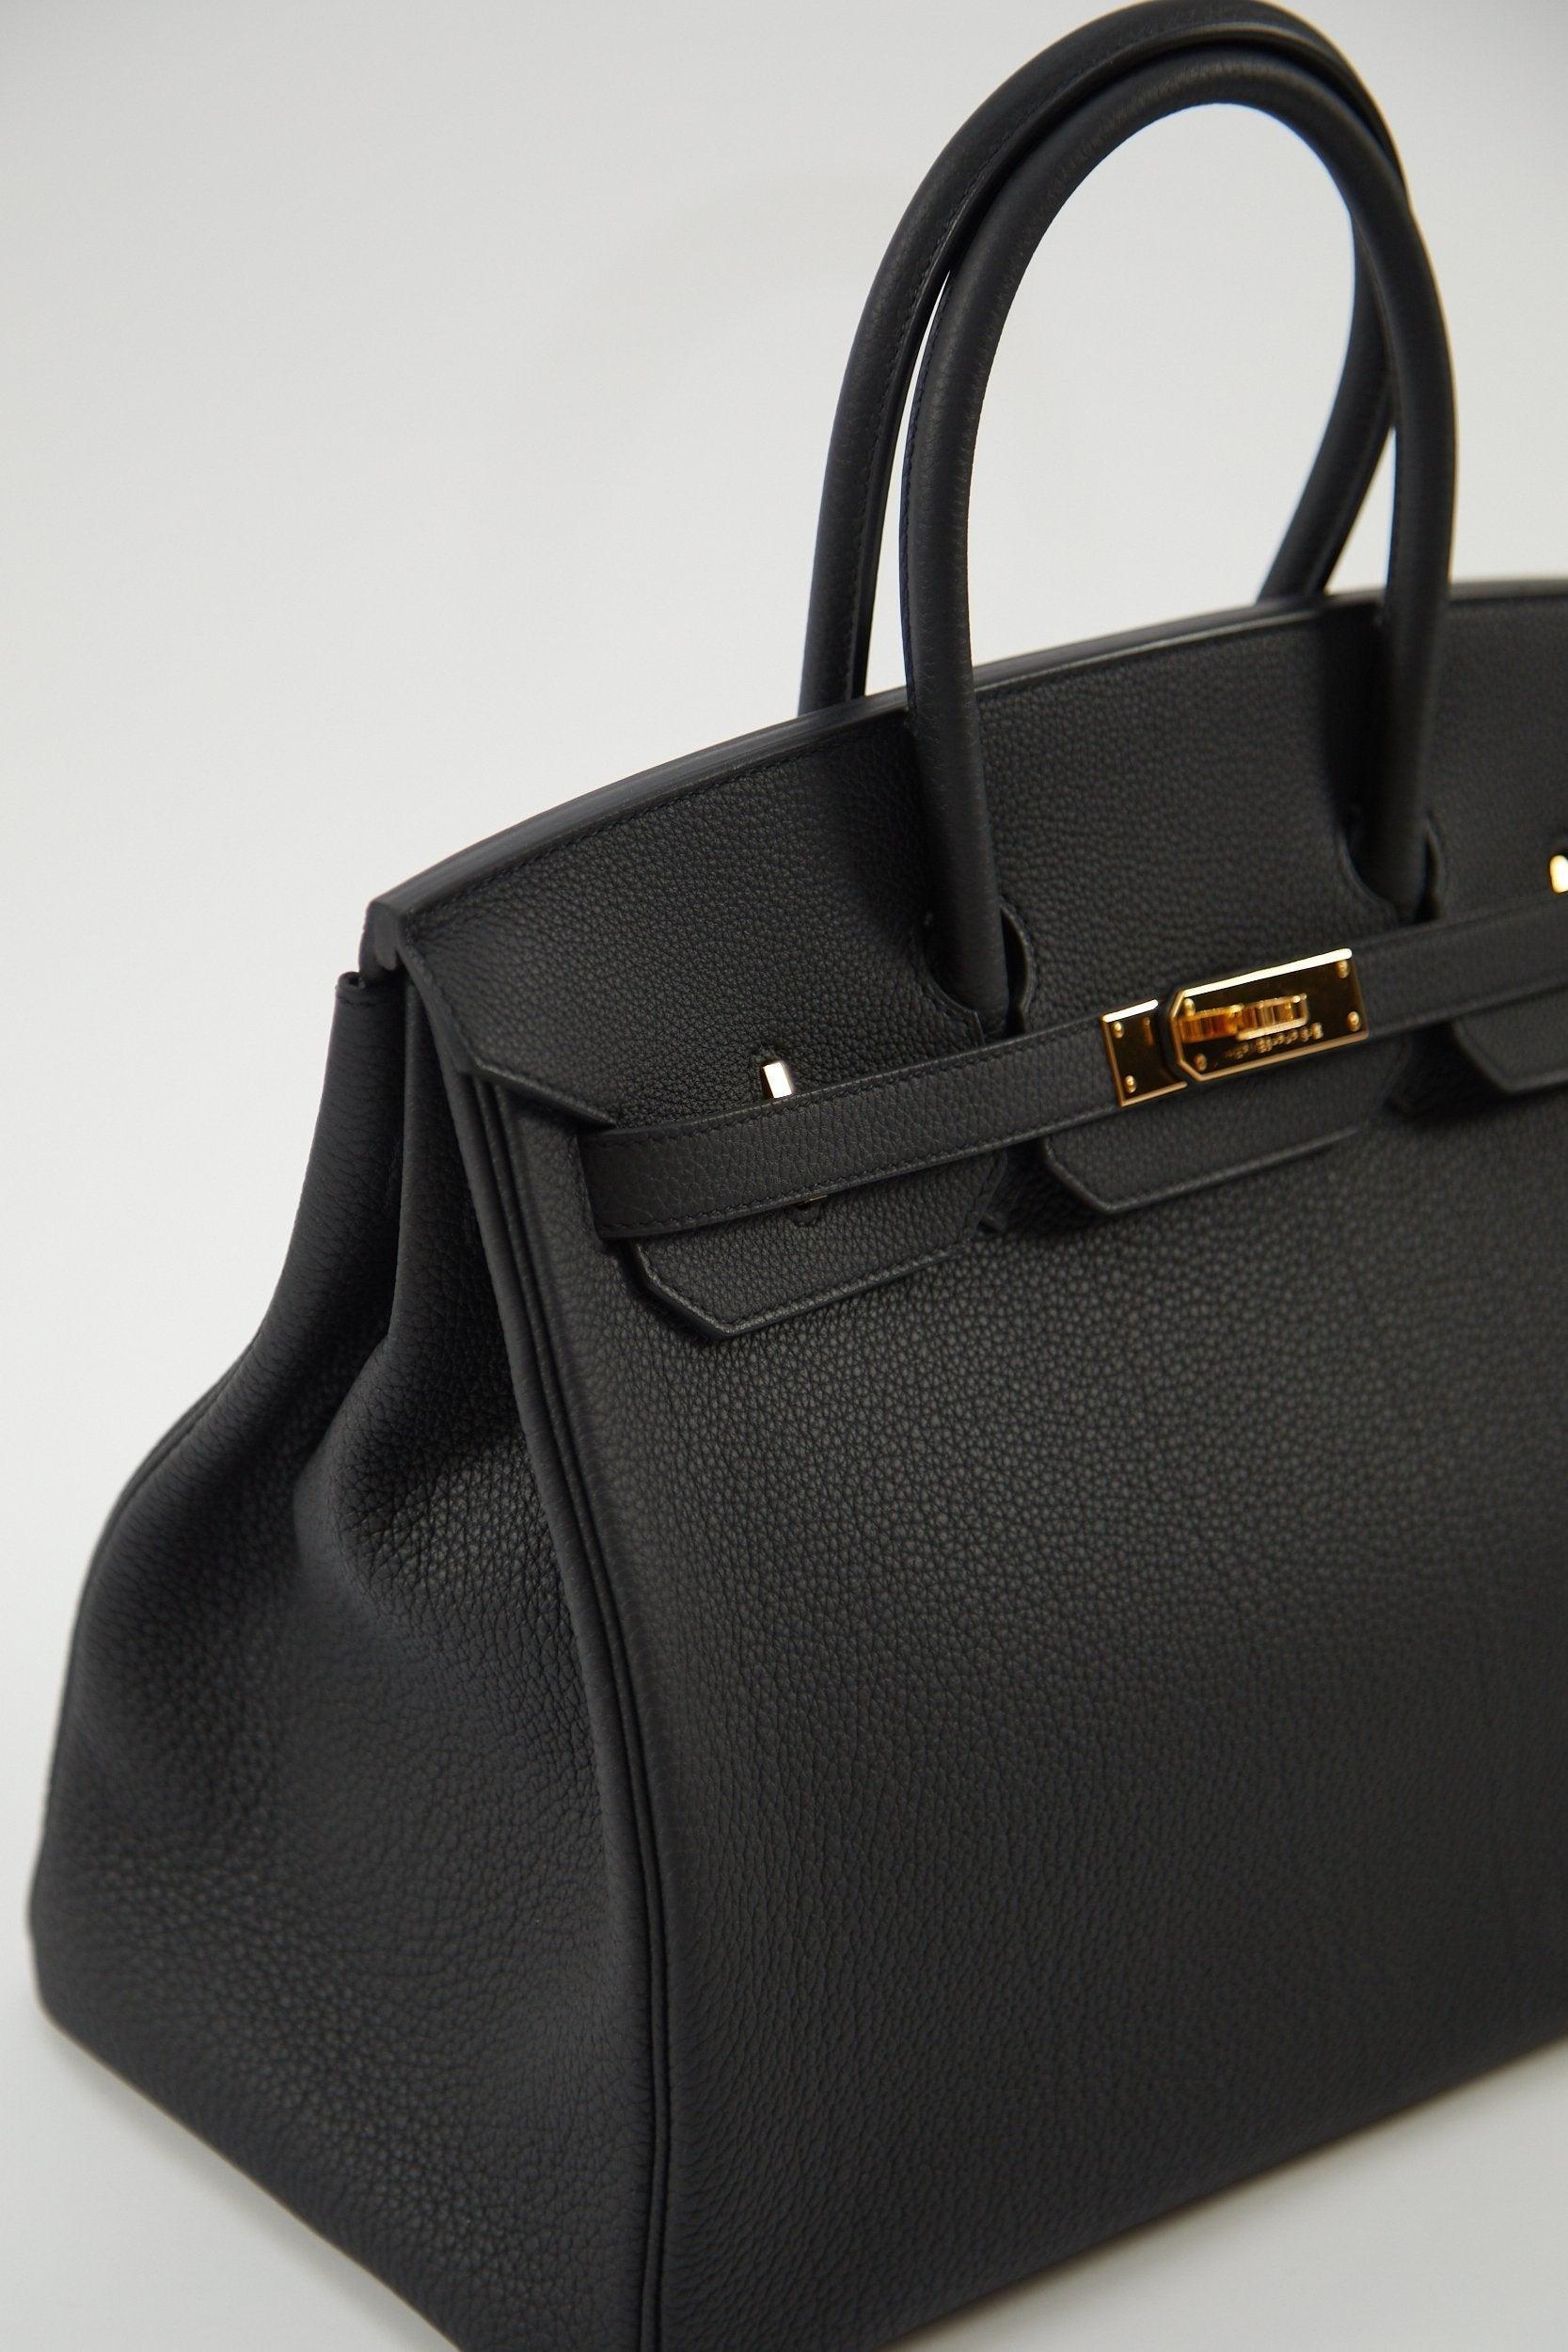 HERMÈS BIRKIN 35CM BLACK Togo Leather with Gold Hardware In Excellent Condition For Sale In London, GB